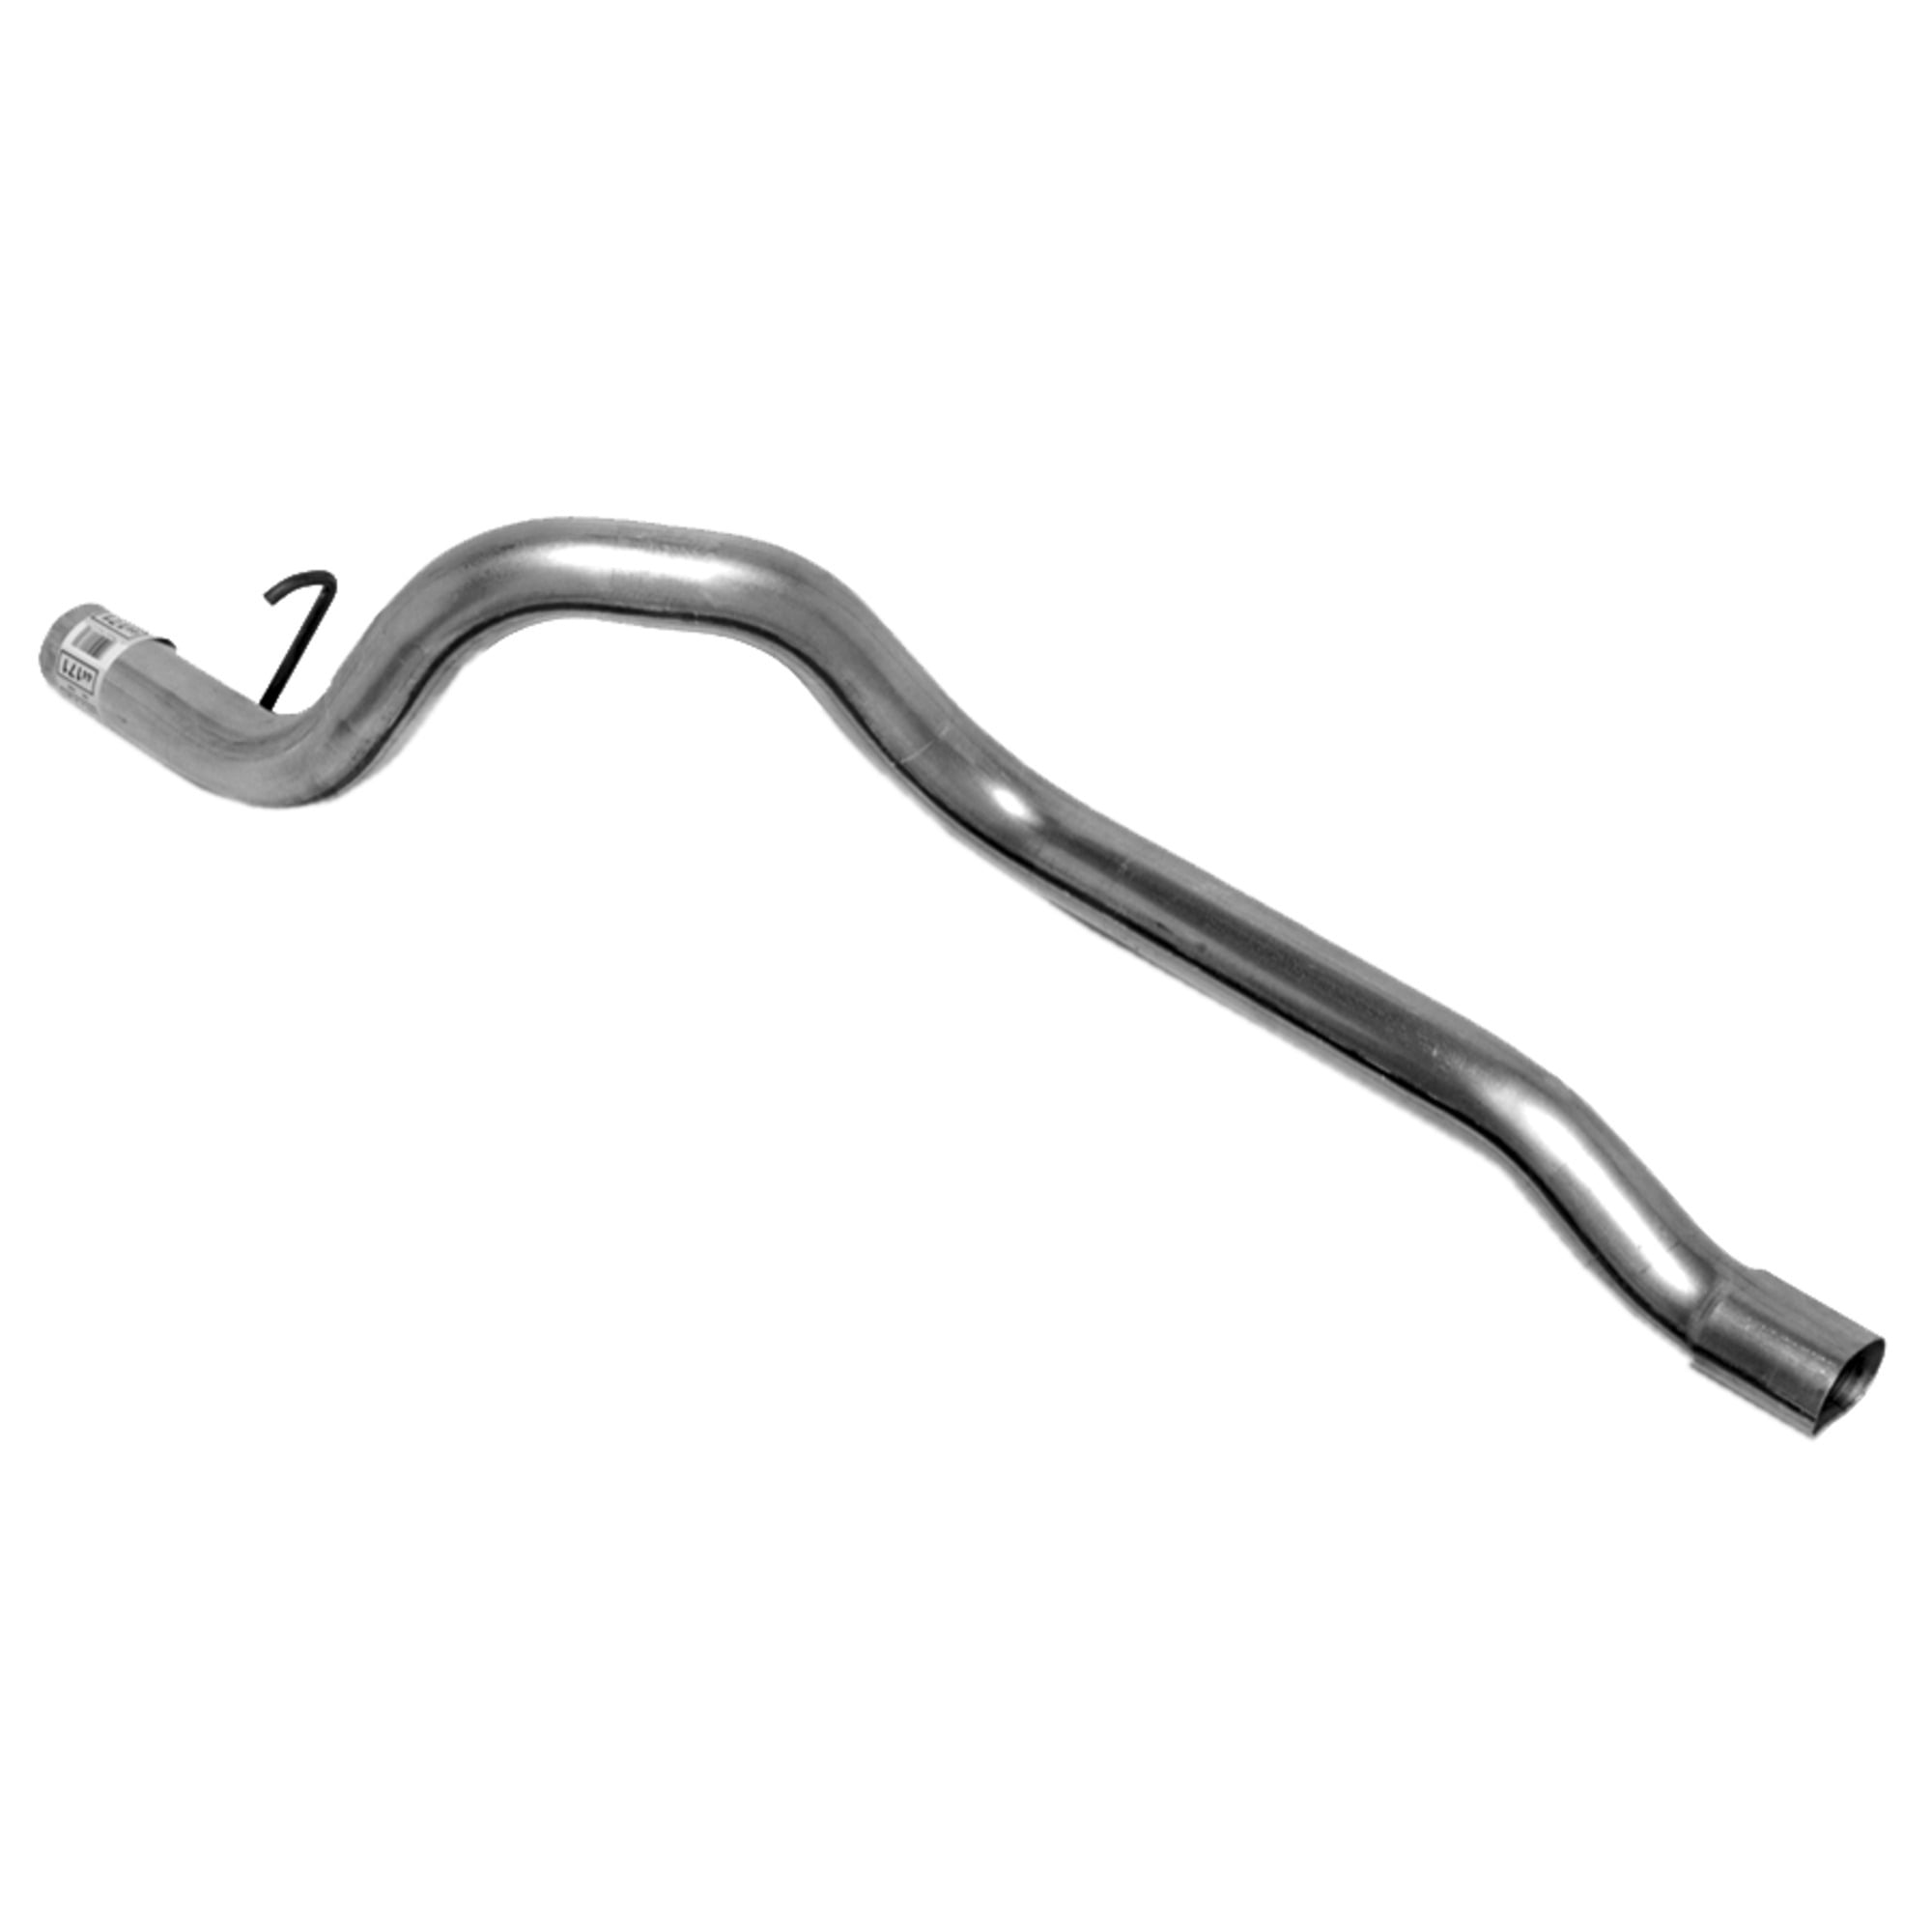 Dynomax 52441 Exhaust Tail Pipe